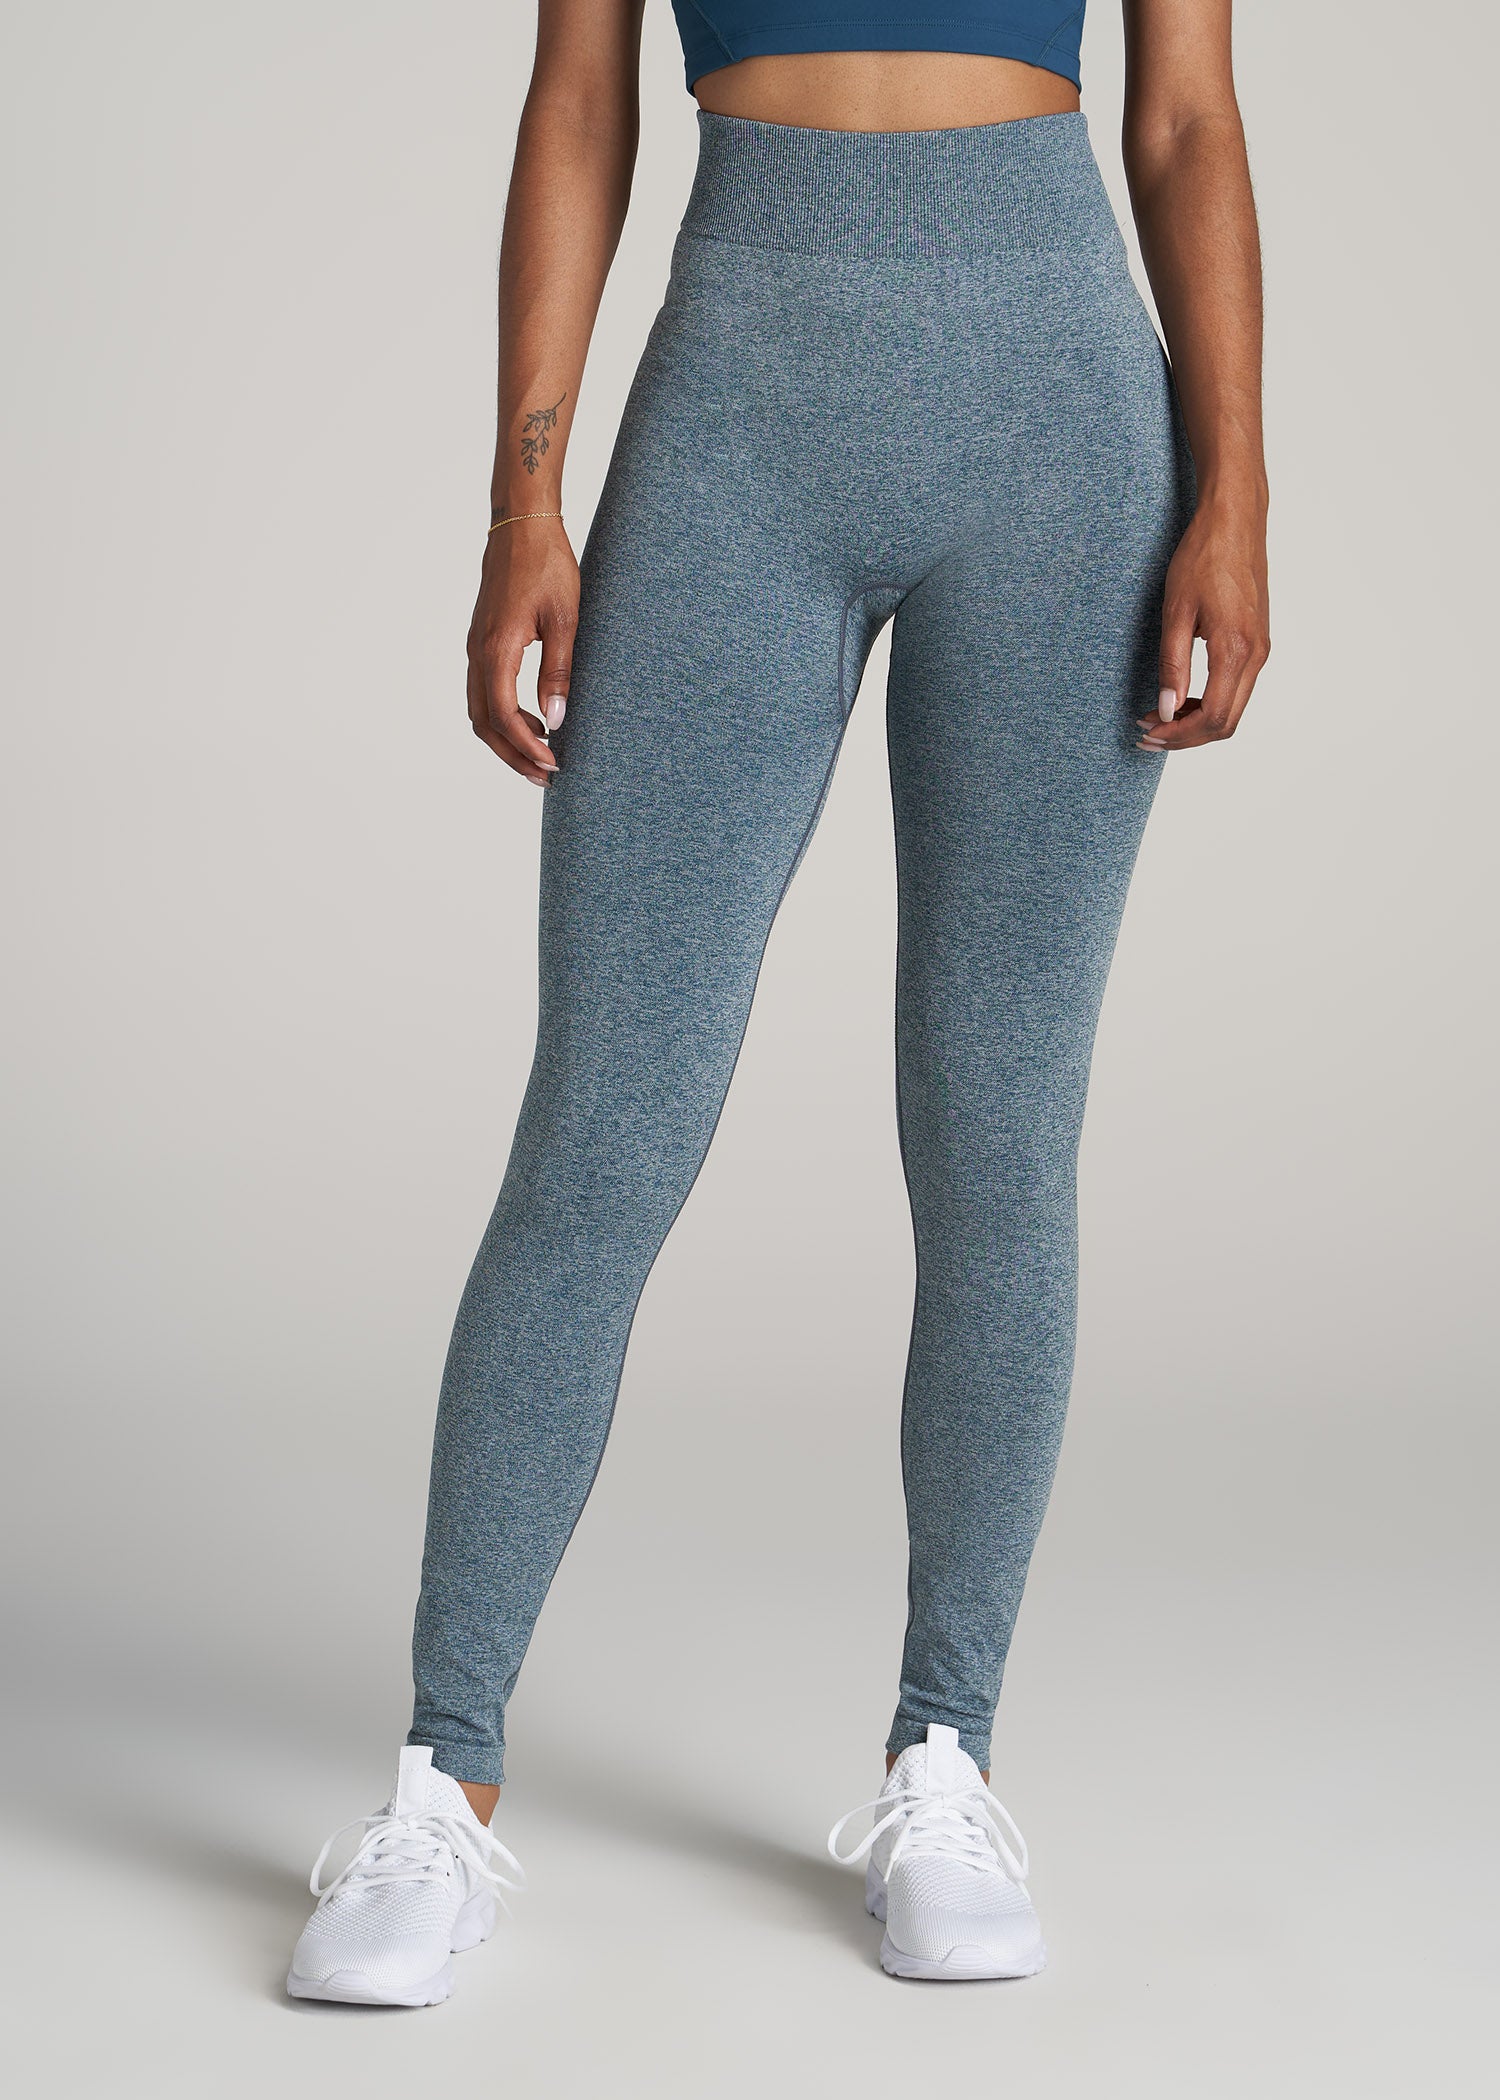 I'm Buying Multiples of My Favorite Comfy  Leggings While They're on  Sale for $9